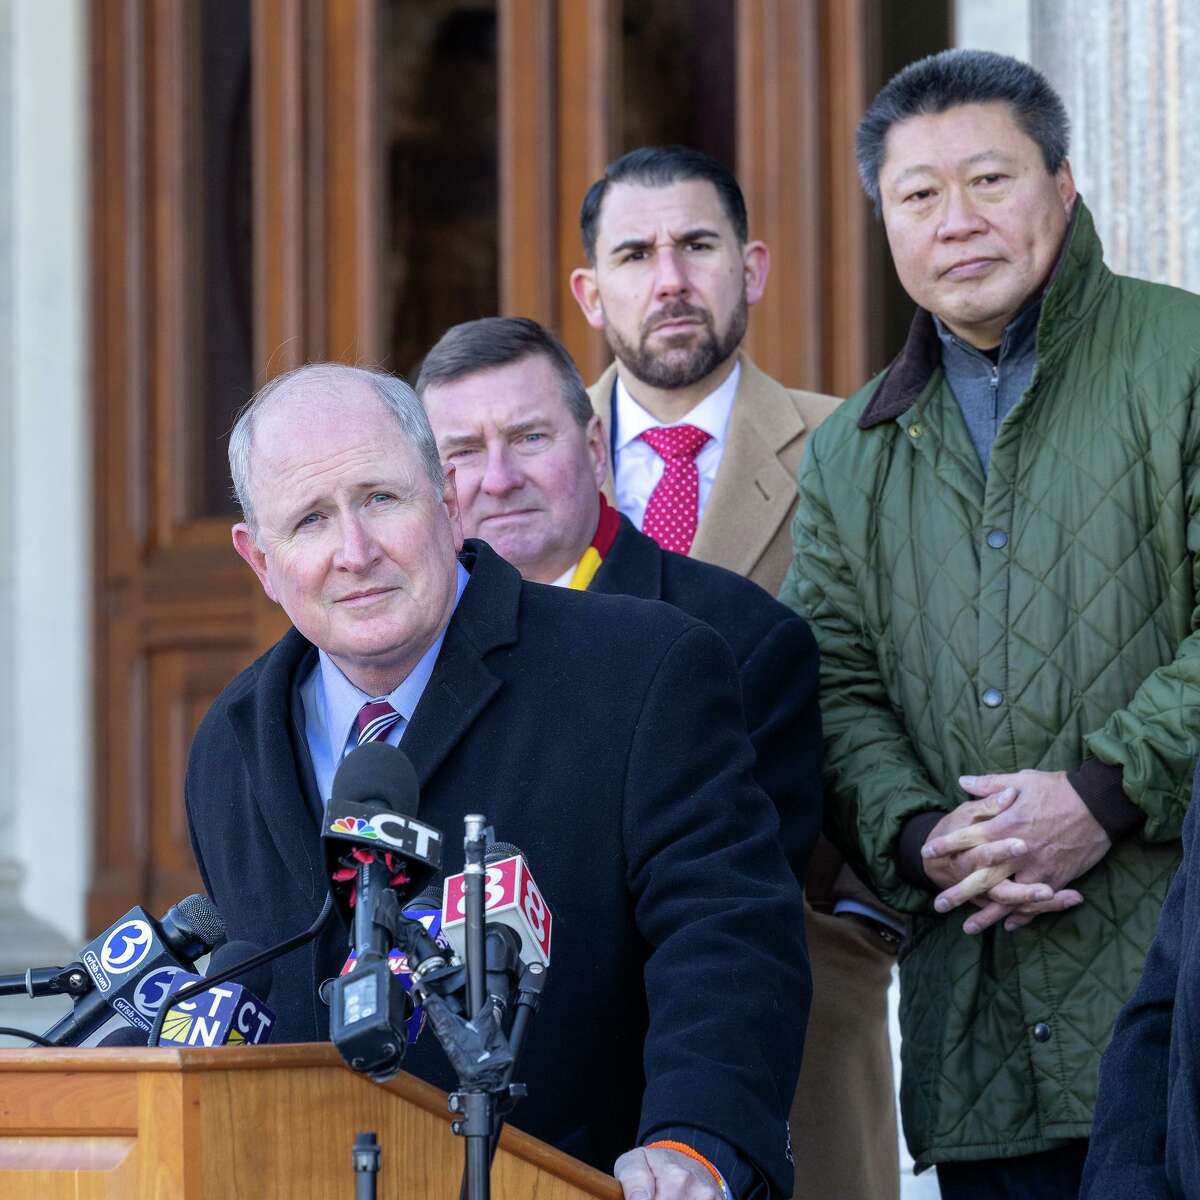 State Senate Minority Leader Kevin Kelly, R-Stratford, during a recent news conference outside the State Capitol.